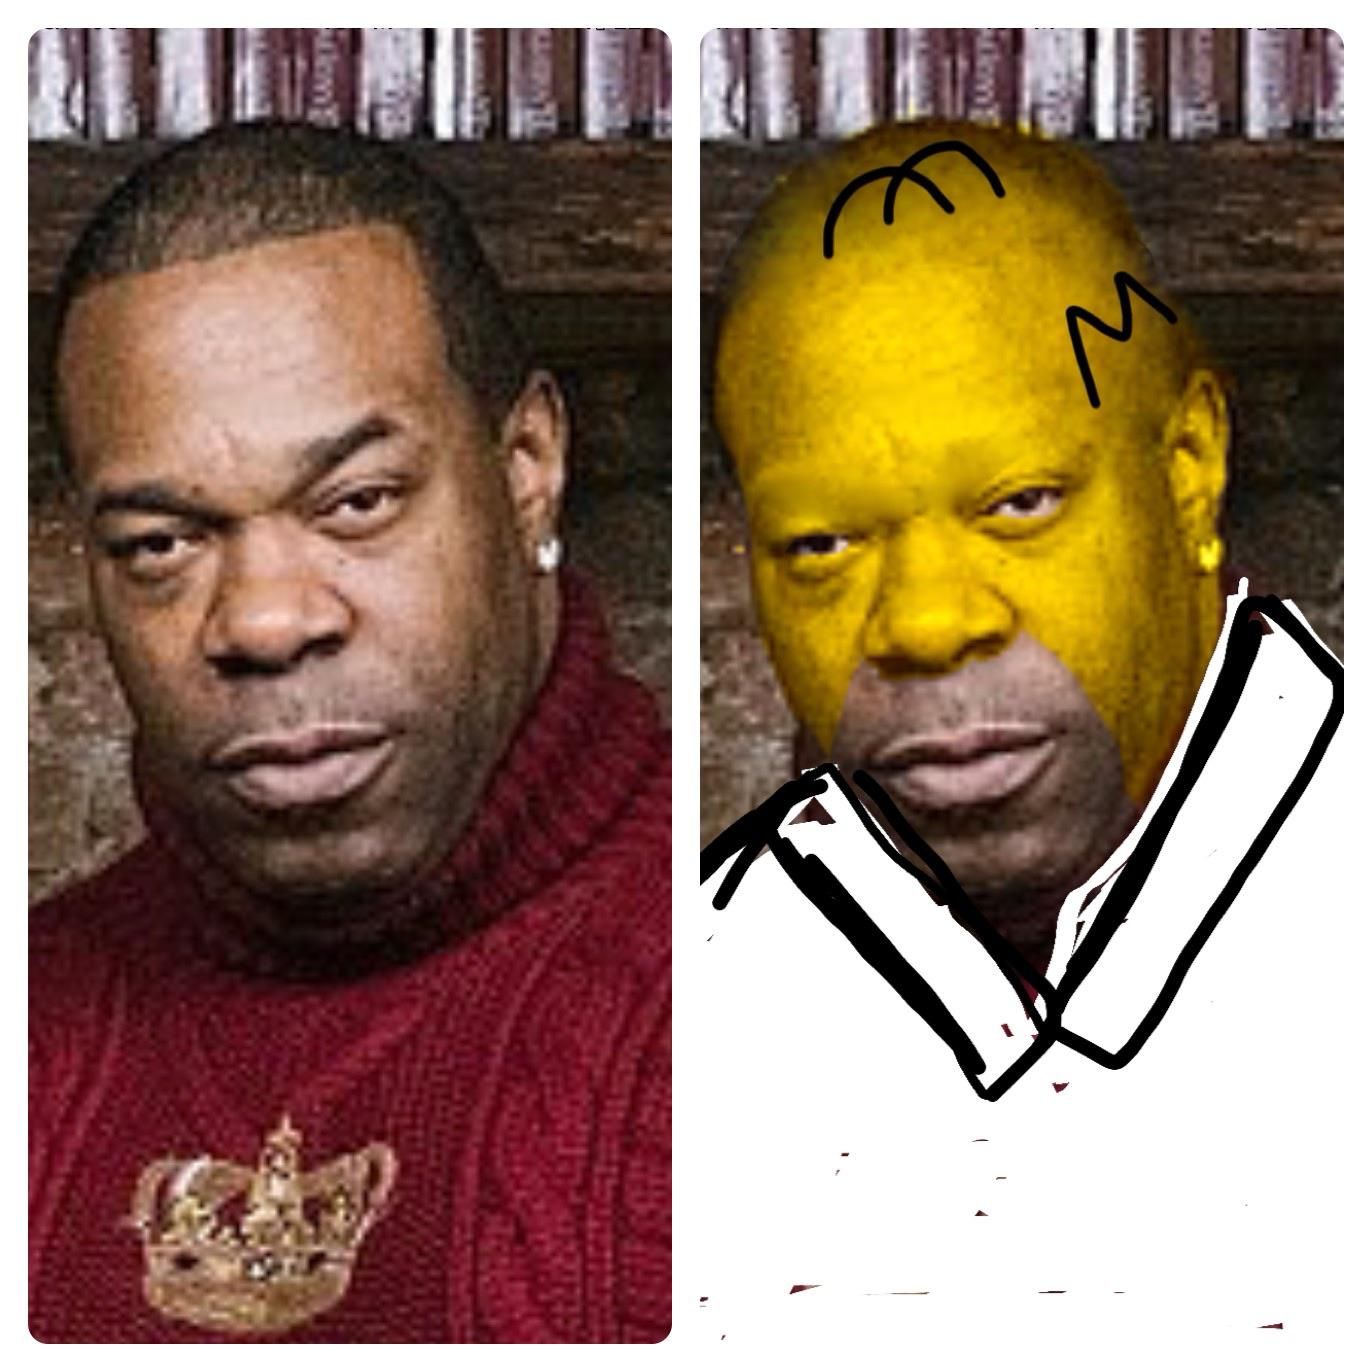 It was bothering me that I couldn’t put my finger on who Busta Rhymes reminded me of. Then it hit me.